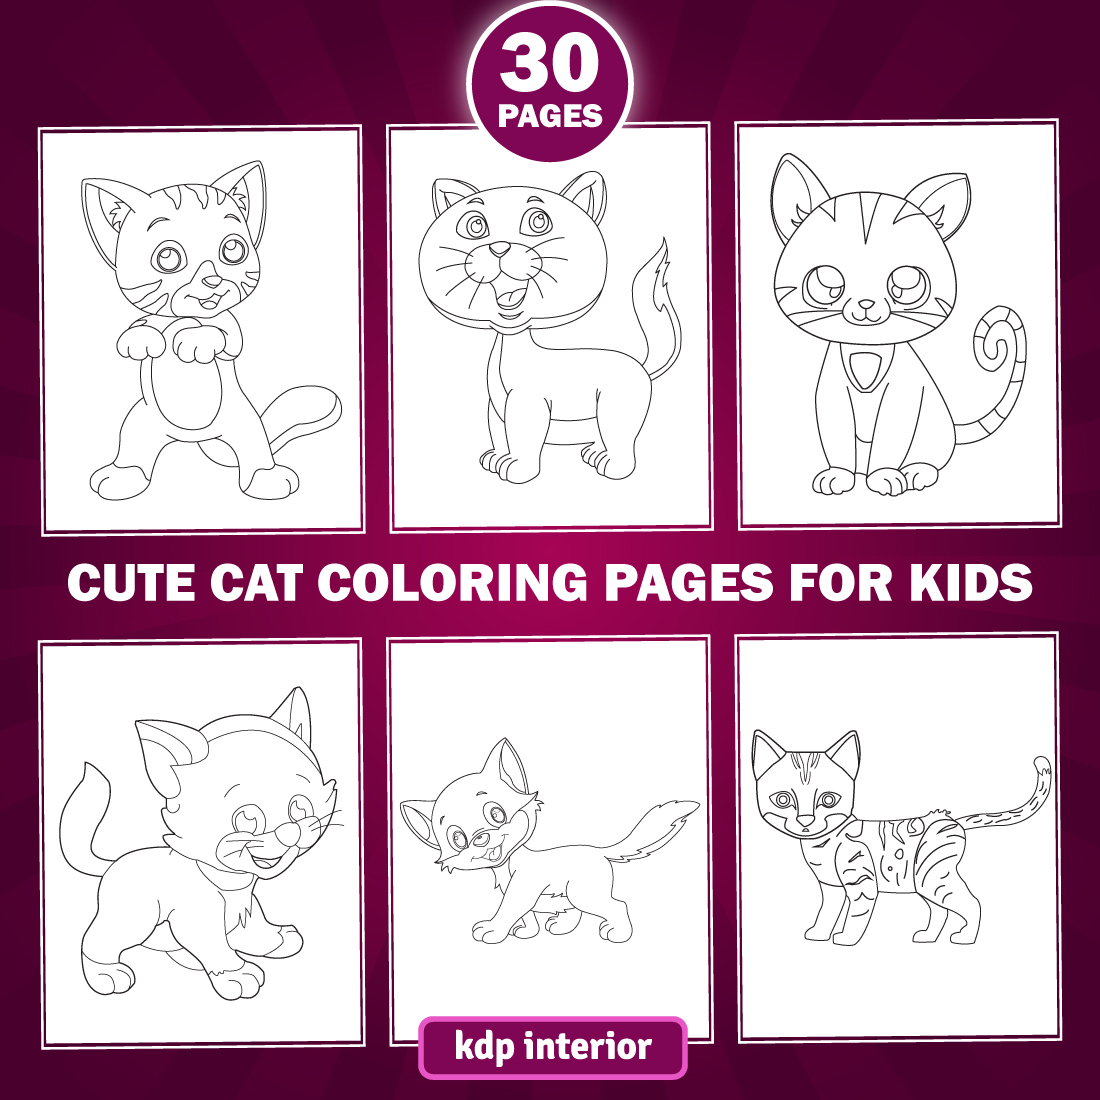 30 Cute Cat Coloring Pages for KDP Interior for Kids and Adult cover image.